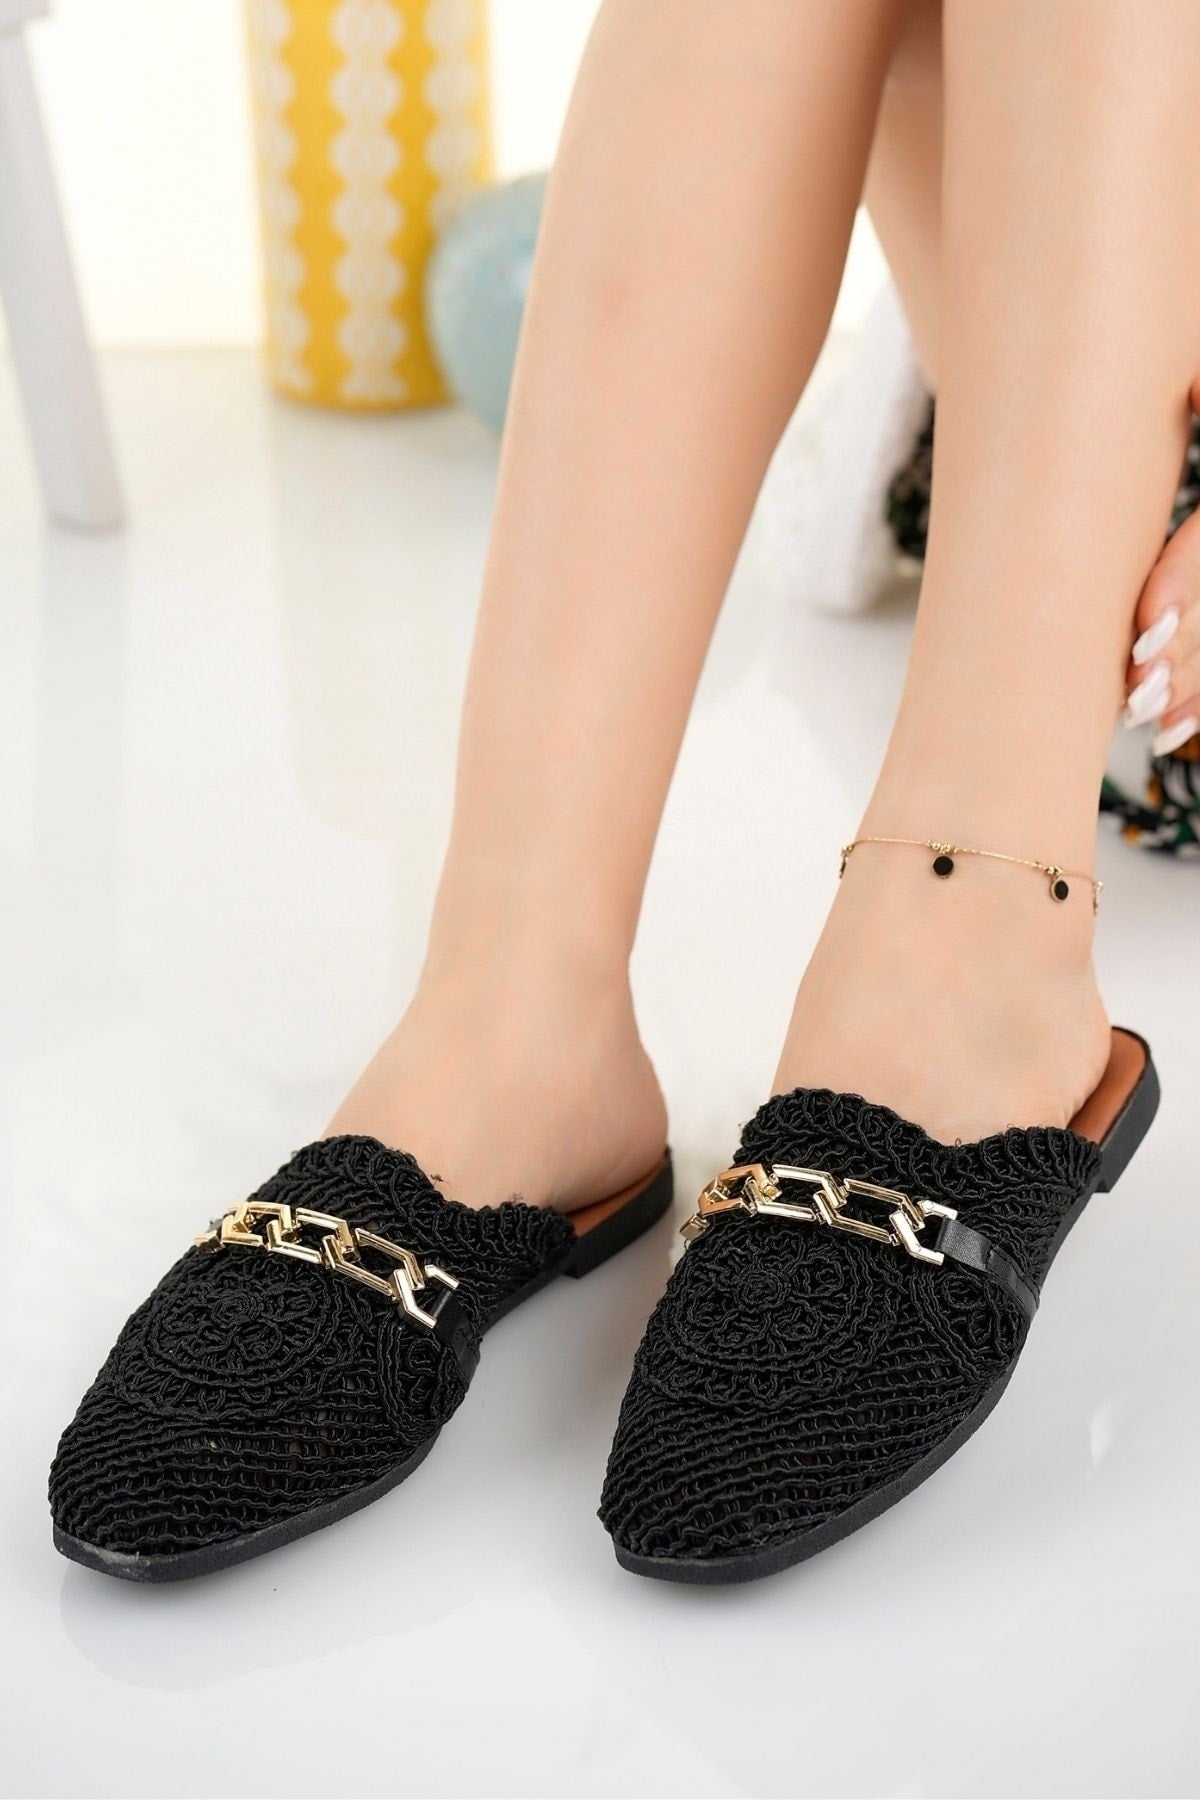 Women's Closed Front Straw Slippers Black Lace Knitted Chain Dowry Daily Slippers